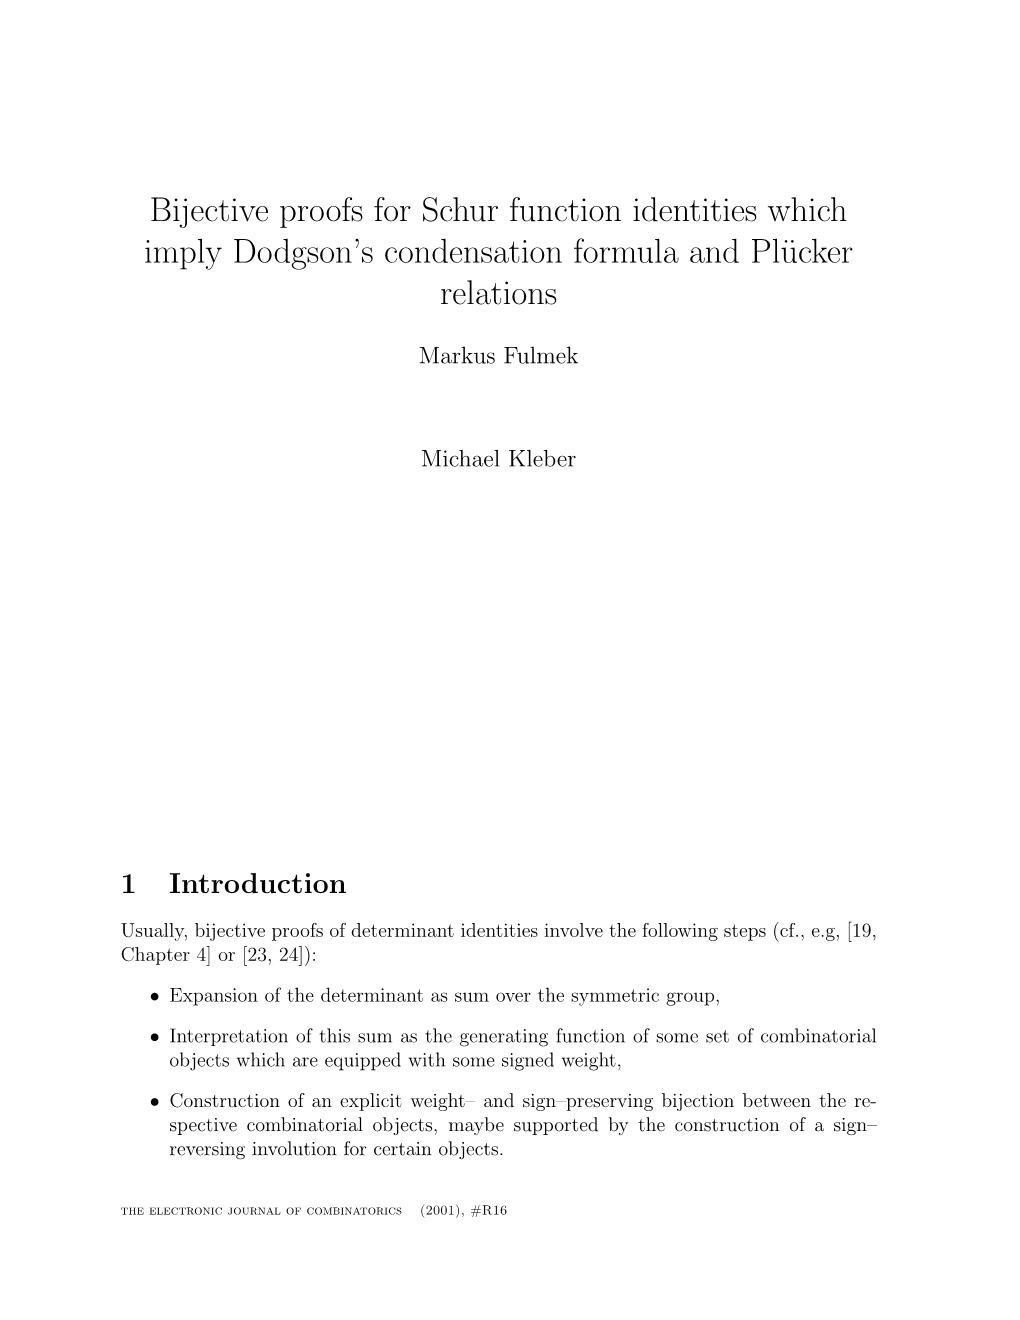 Bijective Proofs for Schur Function Identities Which Imply Dodgson's Condensation Formula and Plücker Relations